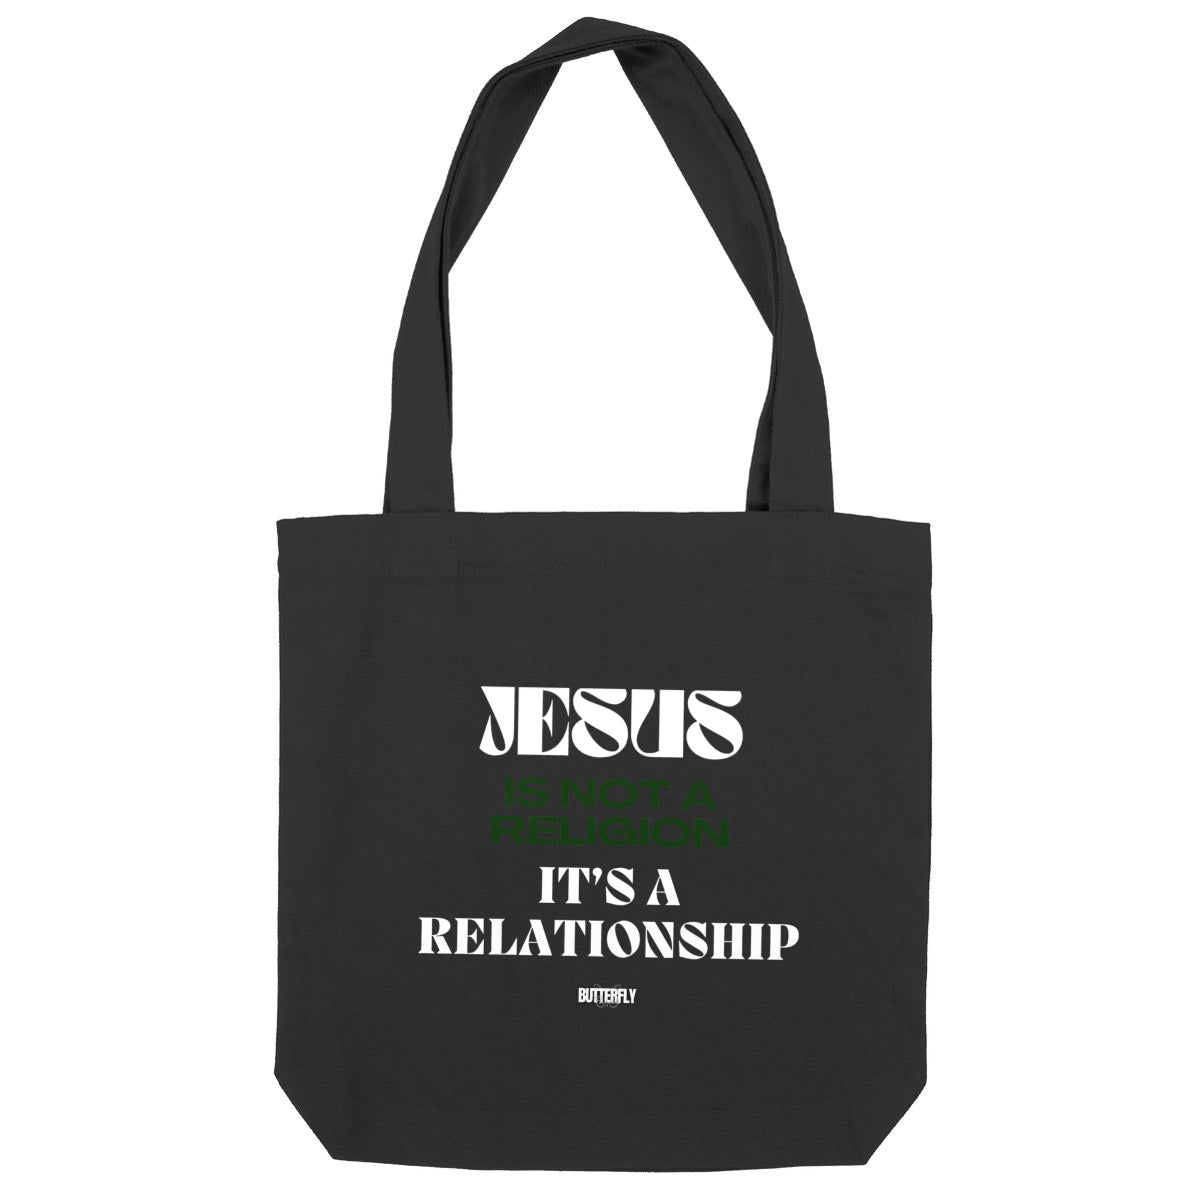 Totebag : Jesus is not a religion